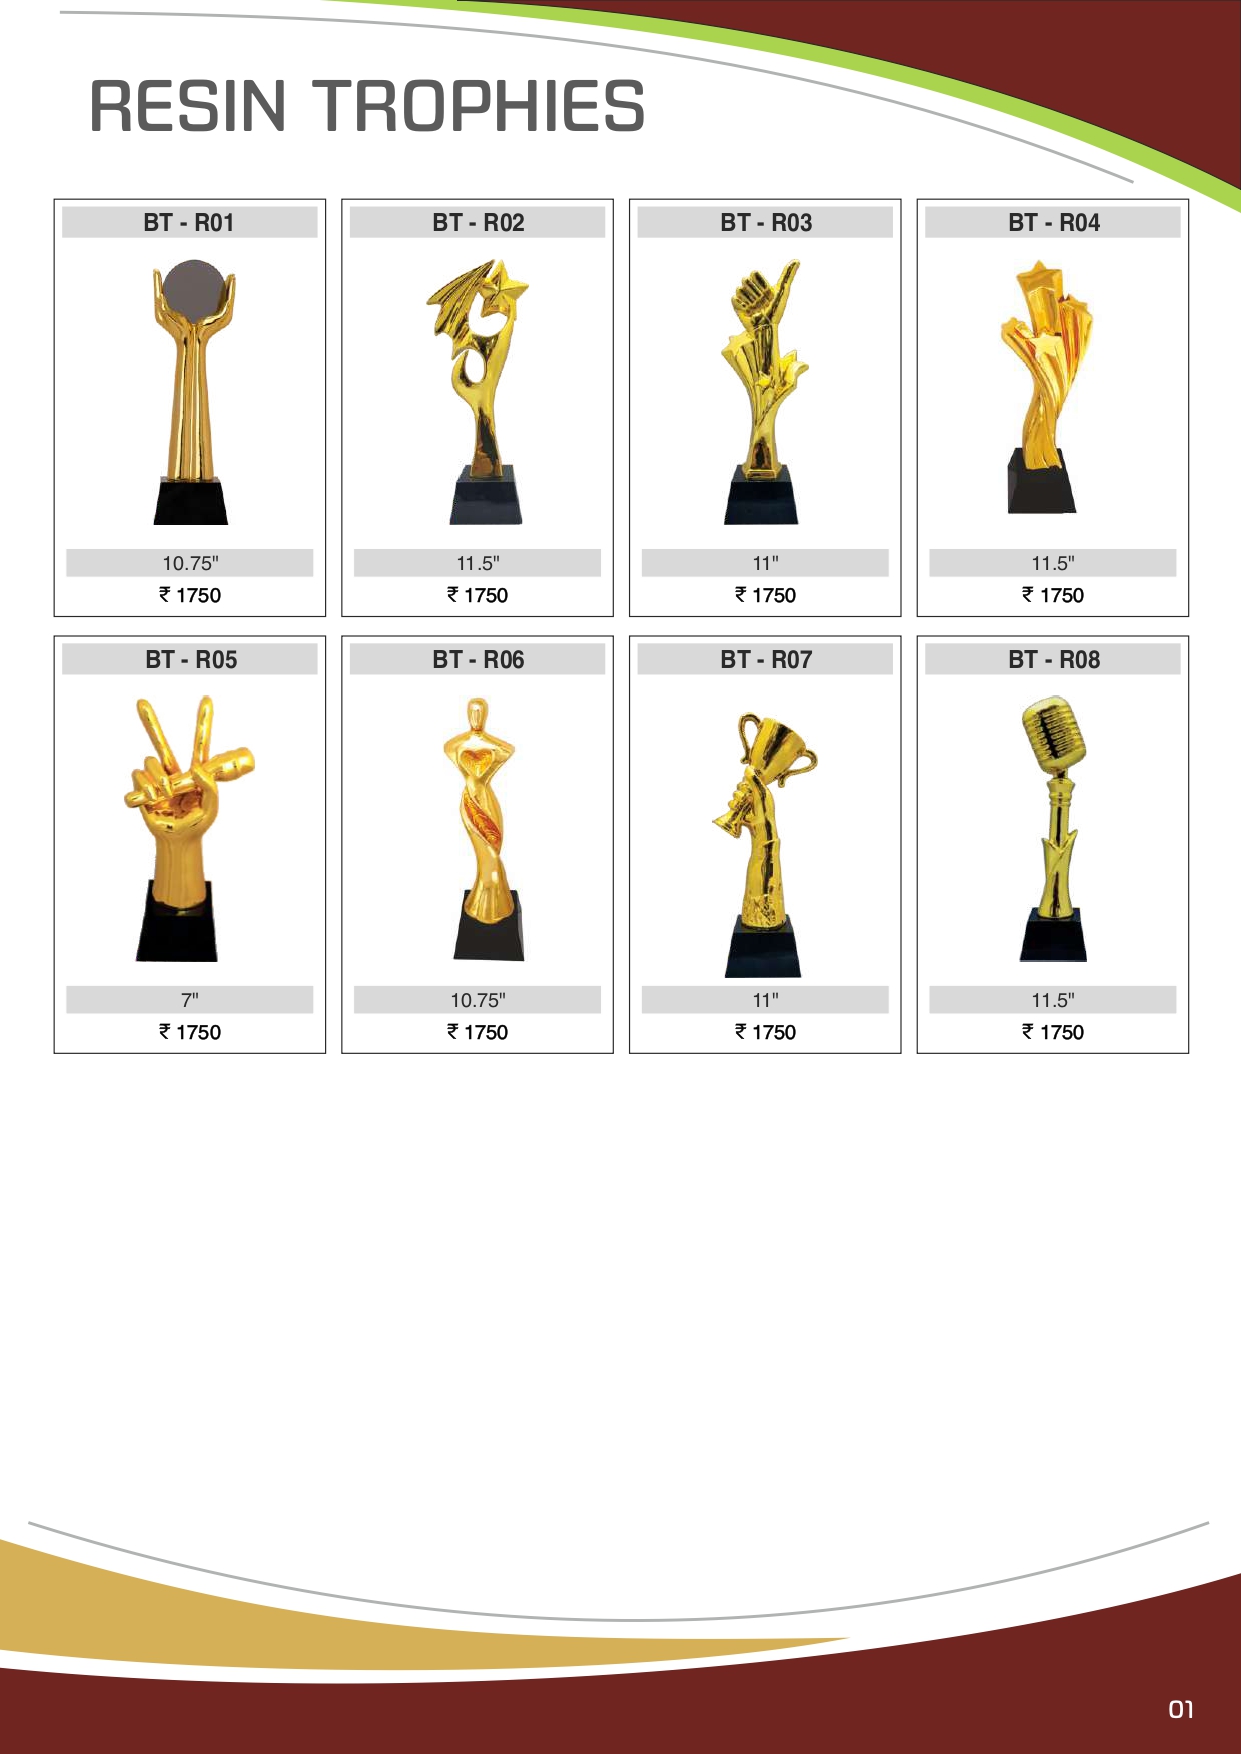 Saga Sports And Trophies - Resin Trophies